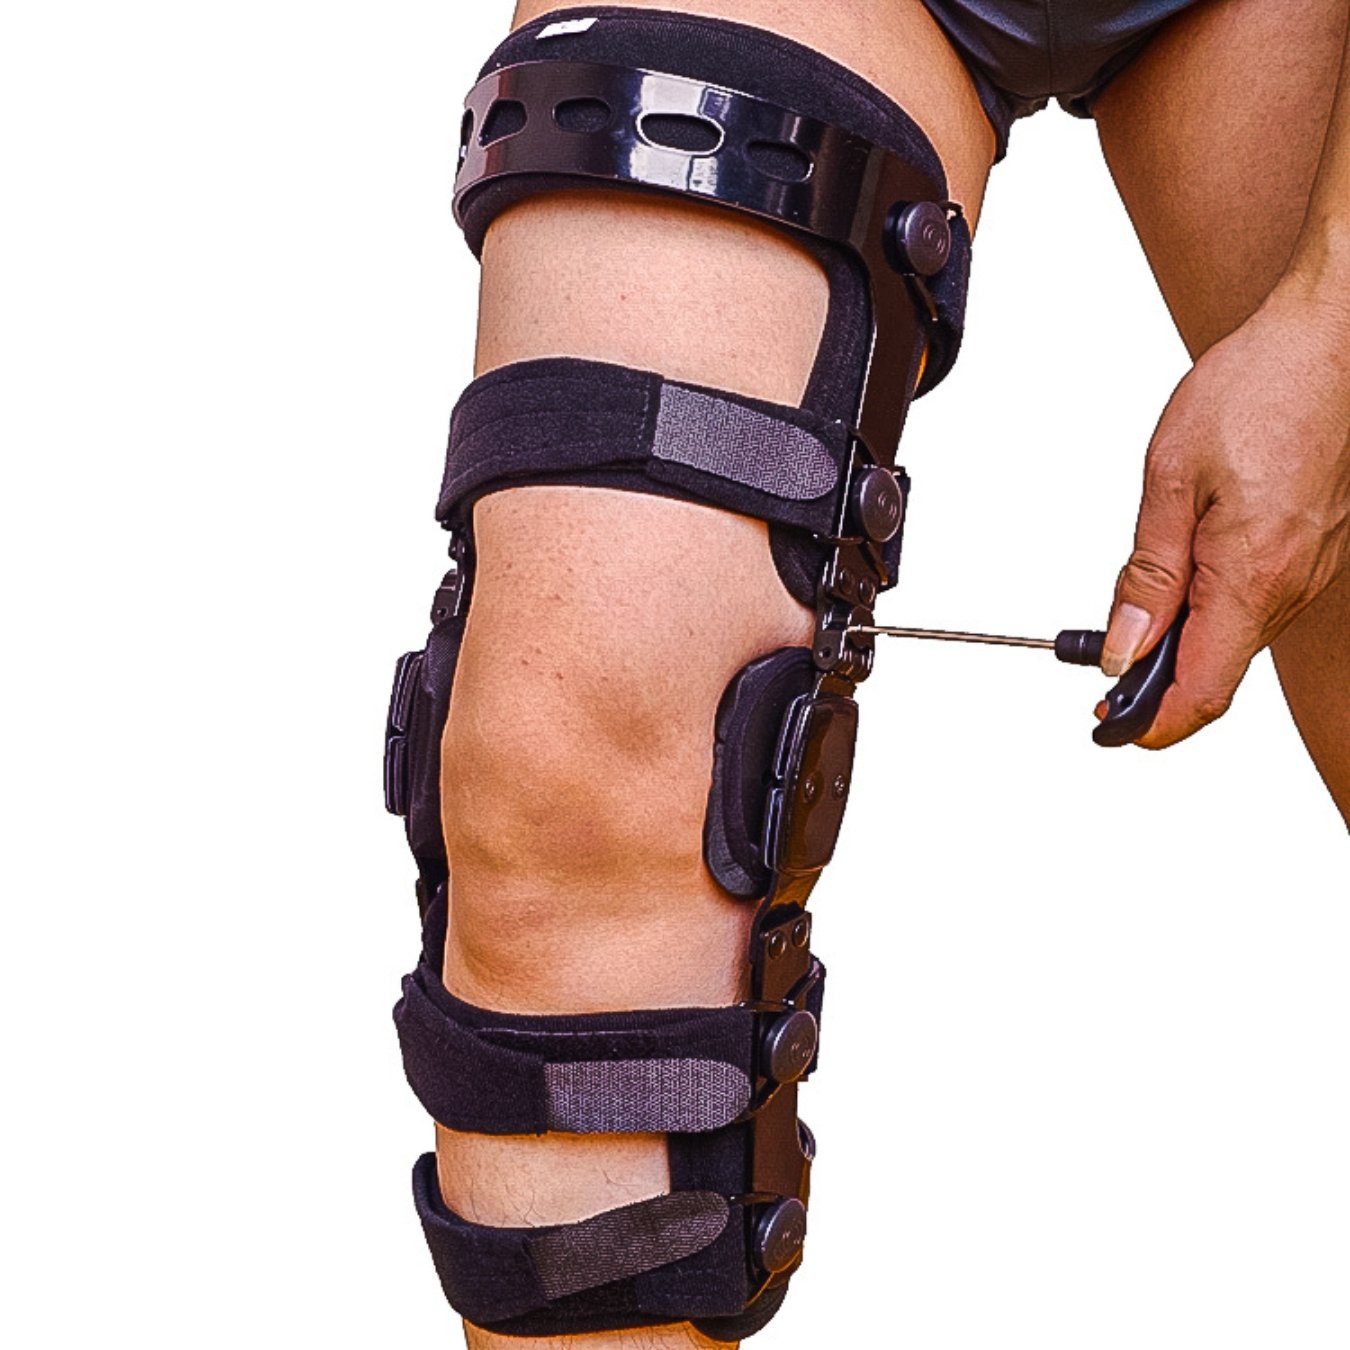 Premium Photo  Knee with knee brace support after surgery with walking  stick of patient in hospital